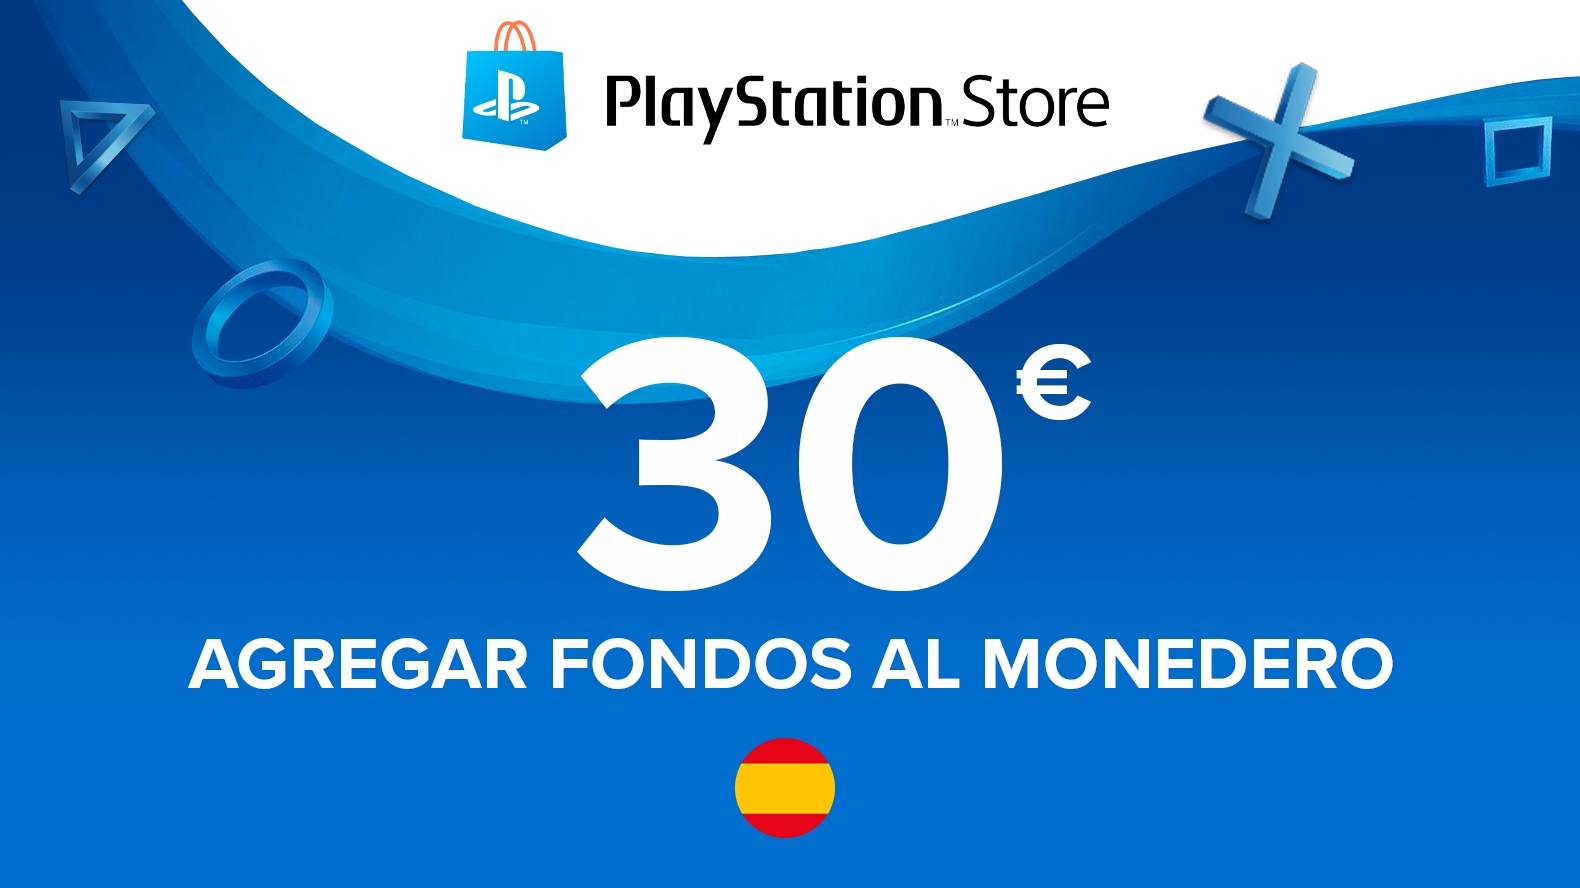 ps4 gift card 30